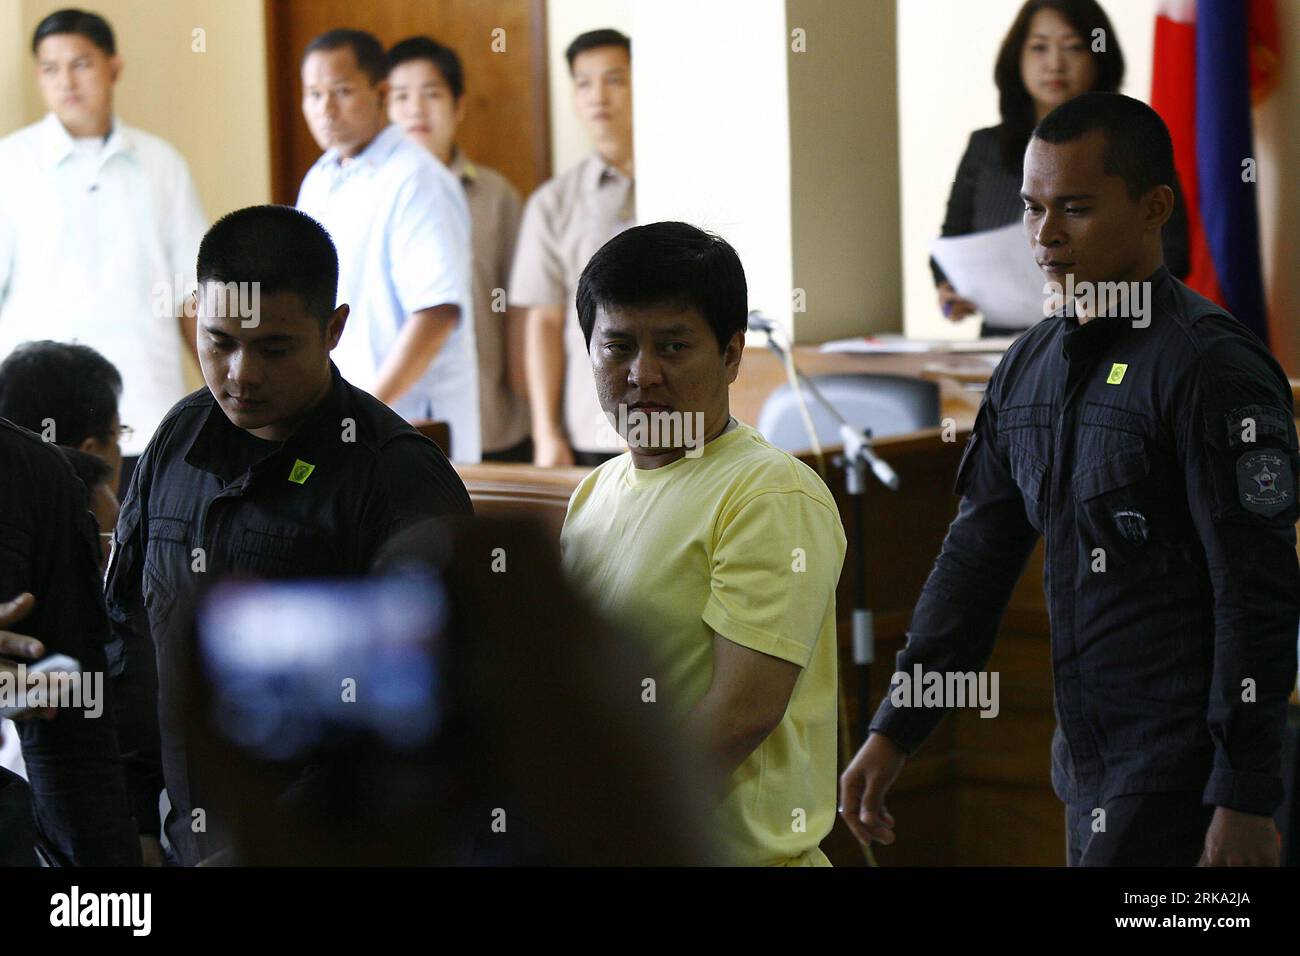 Bildnummer: 54259586  Datum: 28.07.2010  Copyright: imago/Xinhua (100728) -- MANILA, July 28, 2010 (Xinhua) -- Massacre suspect Andal Ampatuan Jr.(C) enters the court room before the start of the arraignment of the Maguindanao massacre inside the prison in Taguig, the Philippines, July 28, 2010. Ampatuan Jr. and 17 other individuals pleaded not guilty to murder charges linked to the massacre of 57 in Maguindanao November 2009. (Xinhua/Rouelle Umali) (lyi) (5)PHILIPPINES-MASSACRE-TRIAL PUBLICATIONxNOTxINxCHN Gesellschaft Manila Prozess kbdig xcb 2010 quer  o0 Massaker    Bildnummer 54259586 Dat Stock Photo